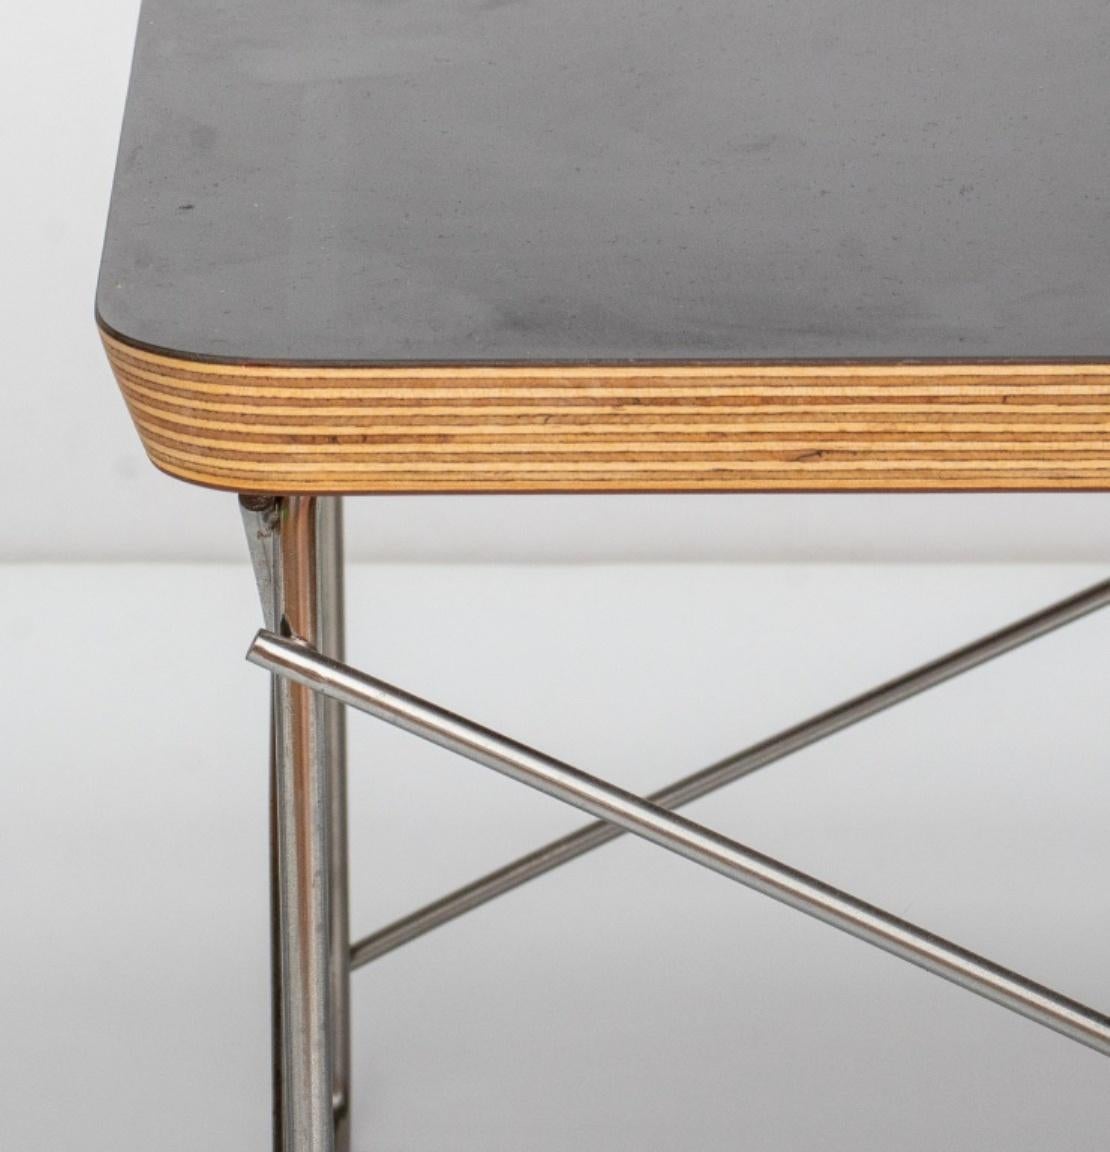 Eames for Herman Miller pair of Modern LTR side tables with black tops, marked on bottom.

Dimensions: 10